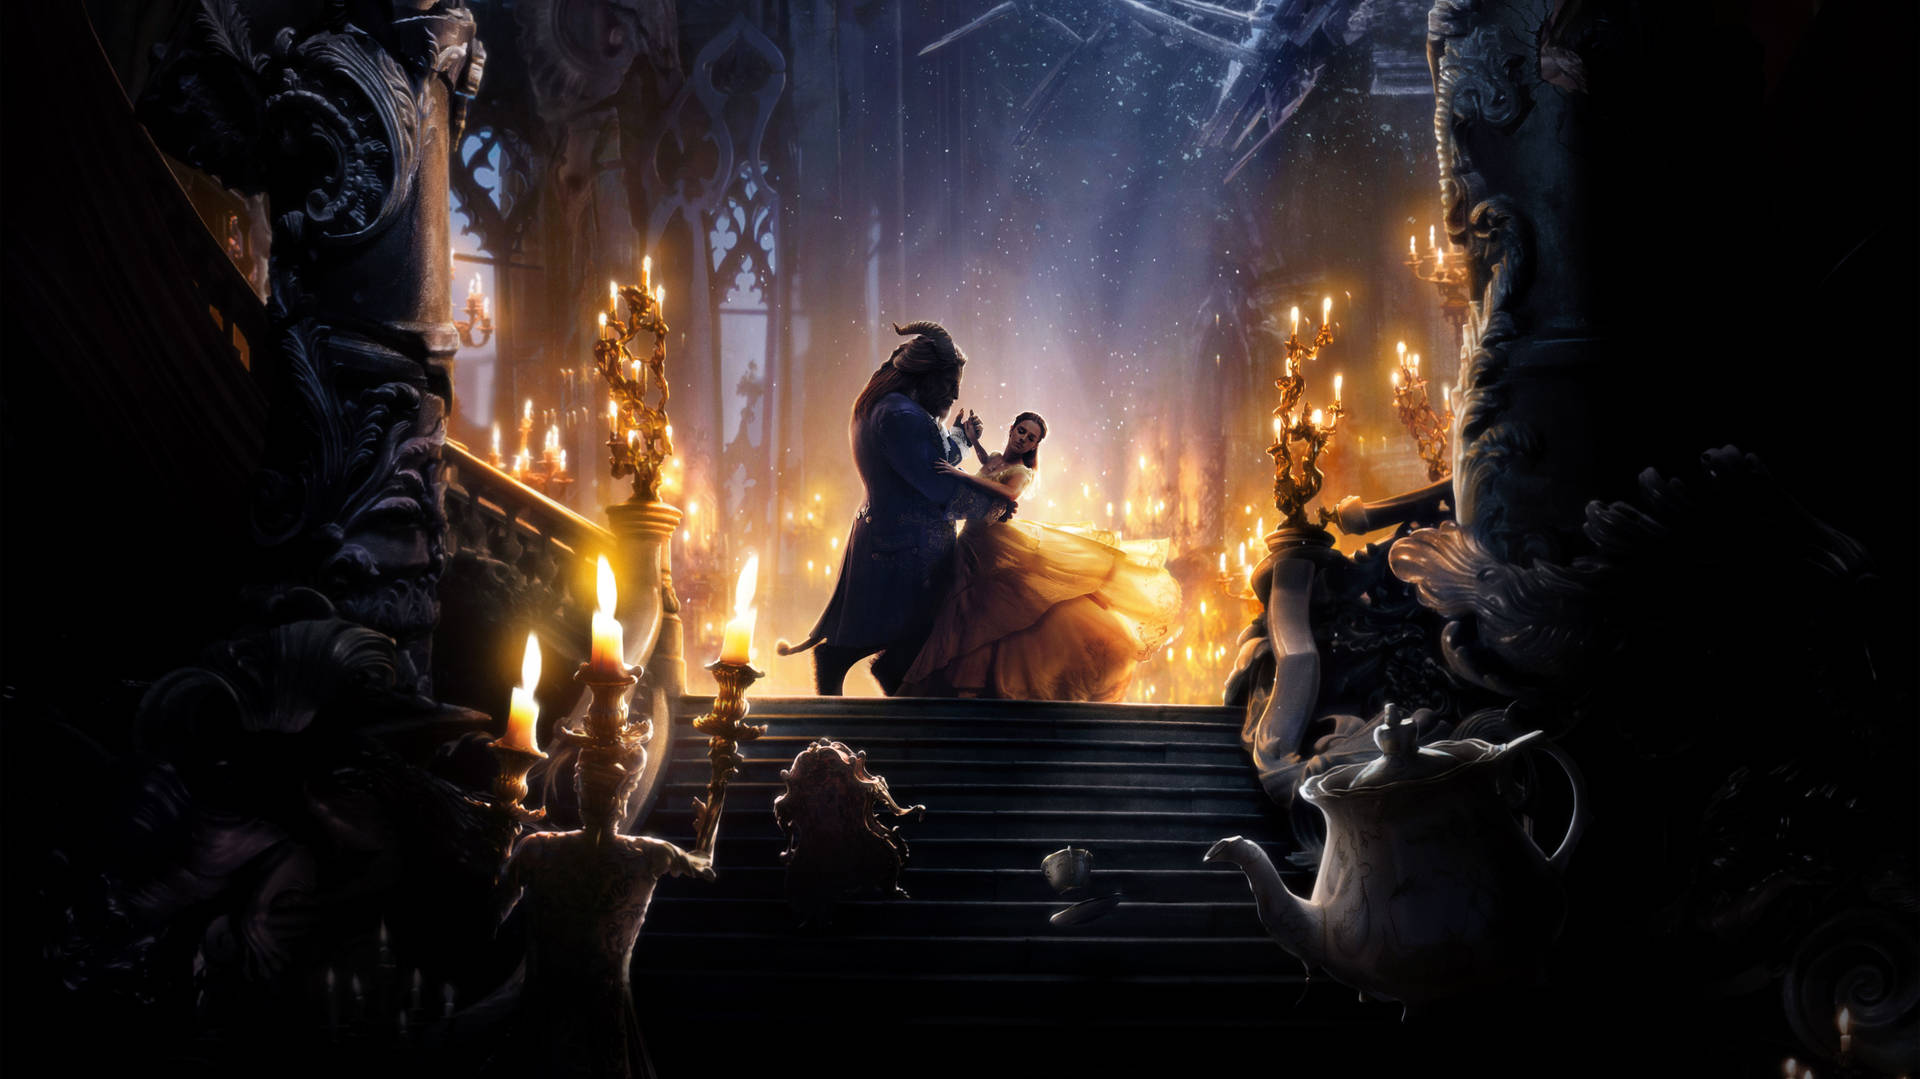 Beauty And The Beast Romantic Dance Wallpaper